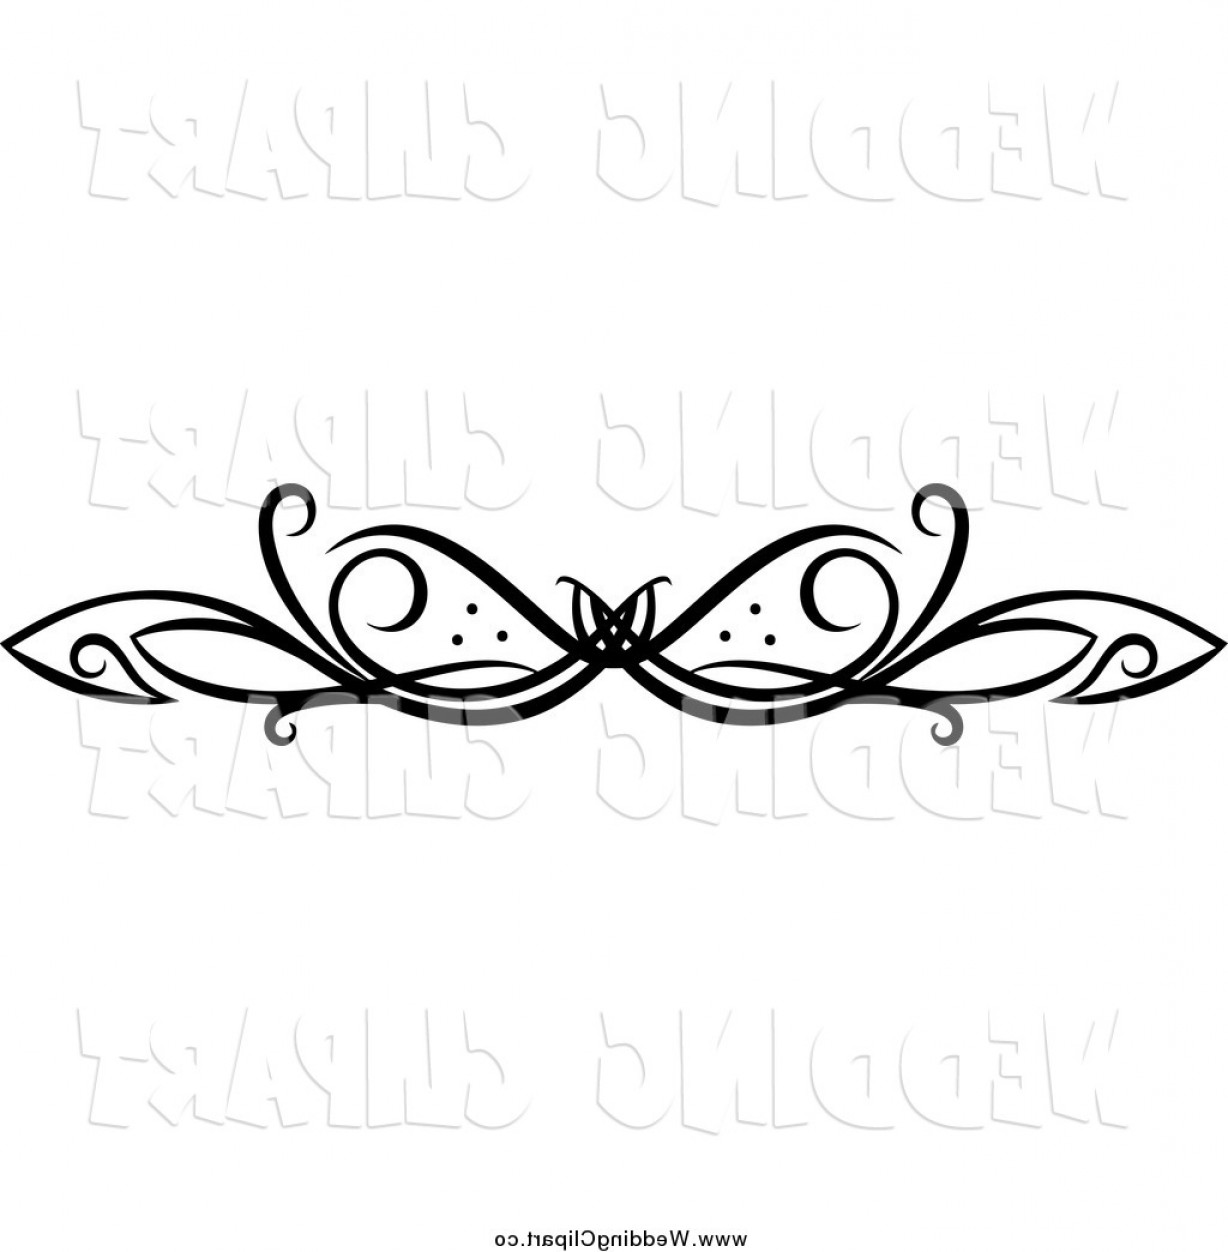 marriage clipart vector